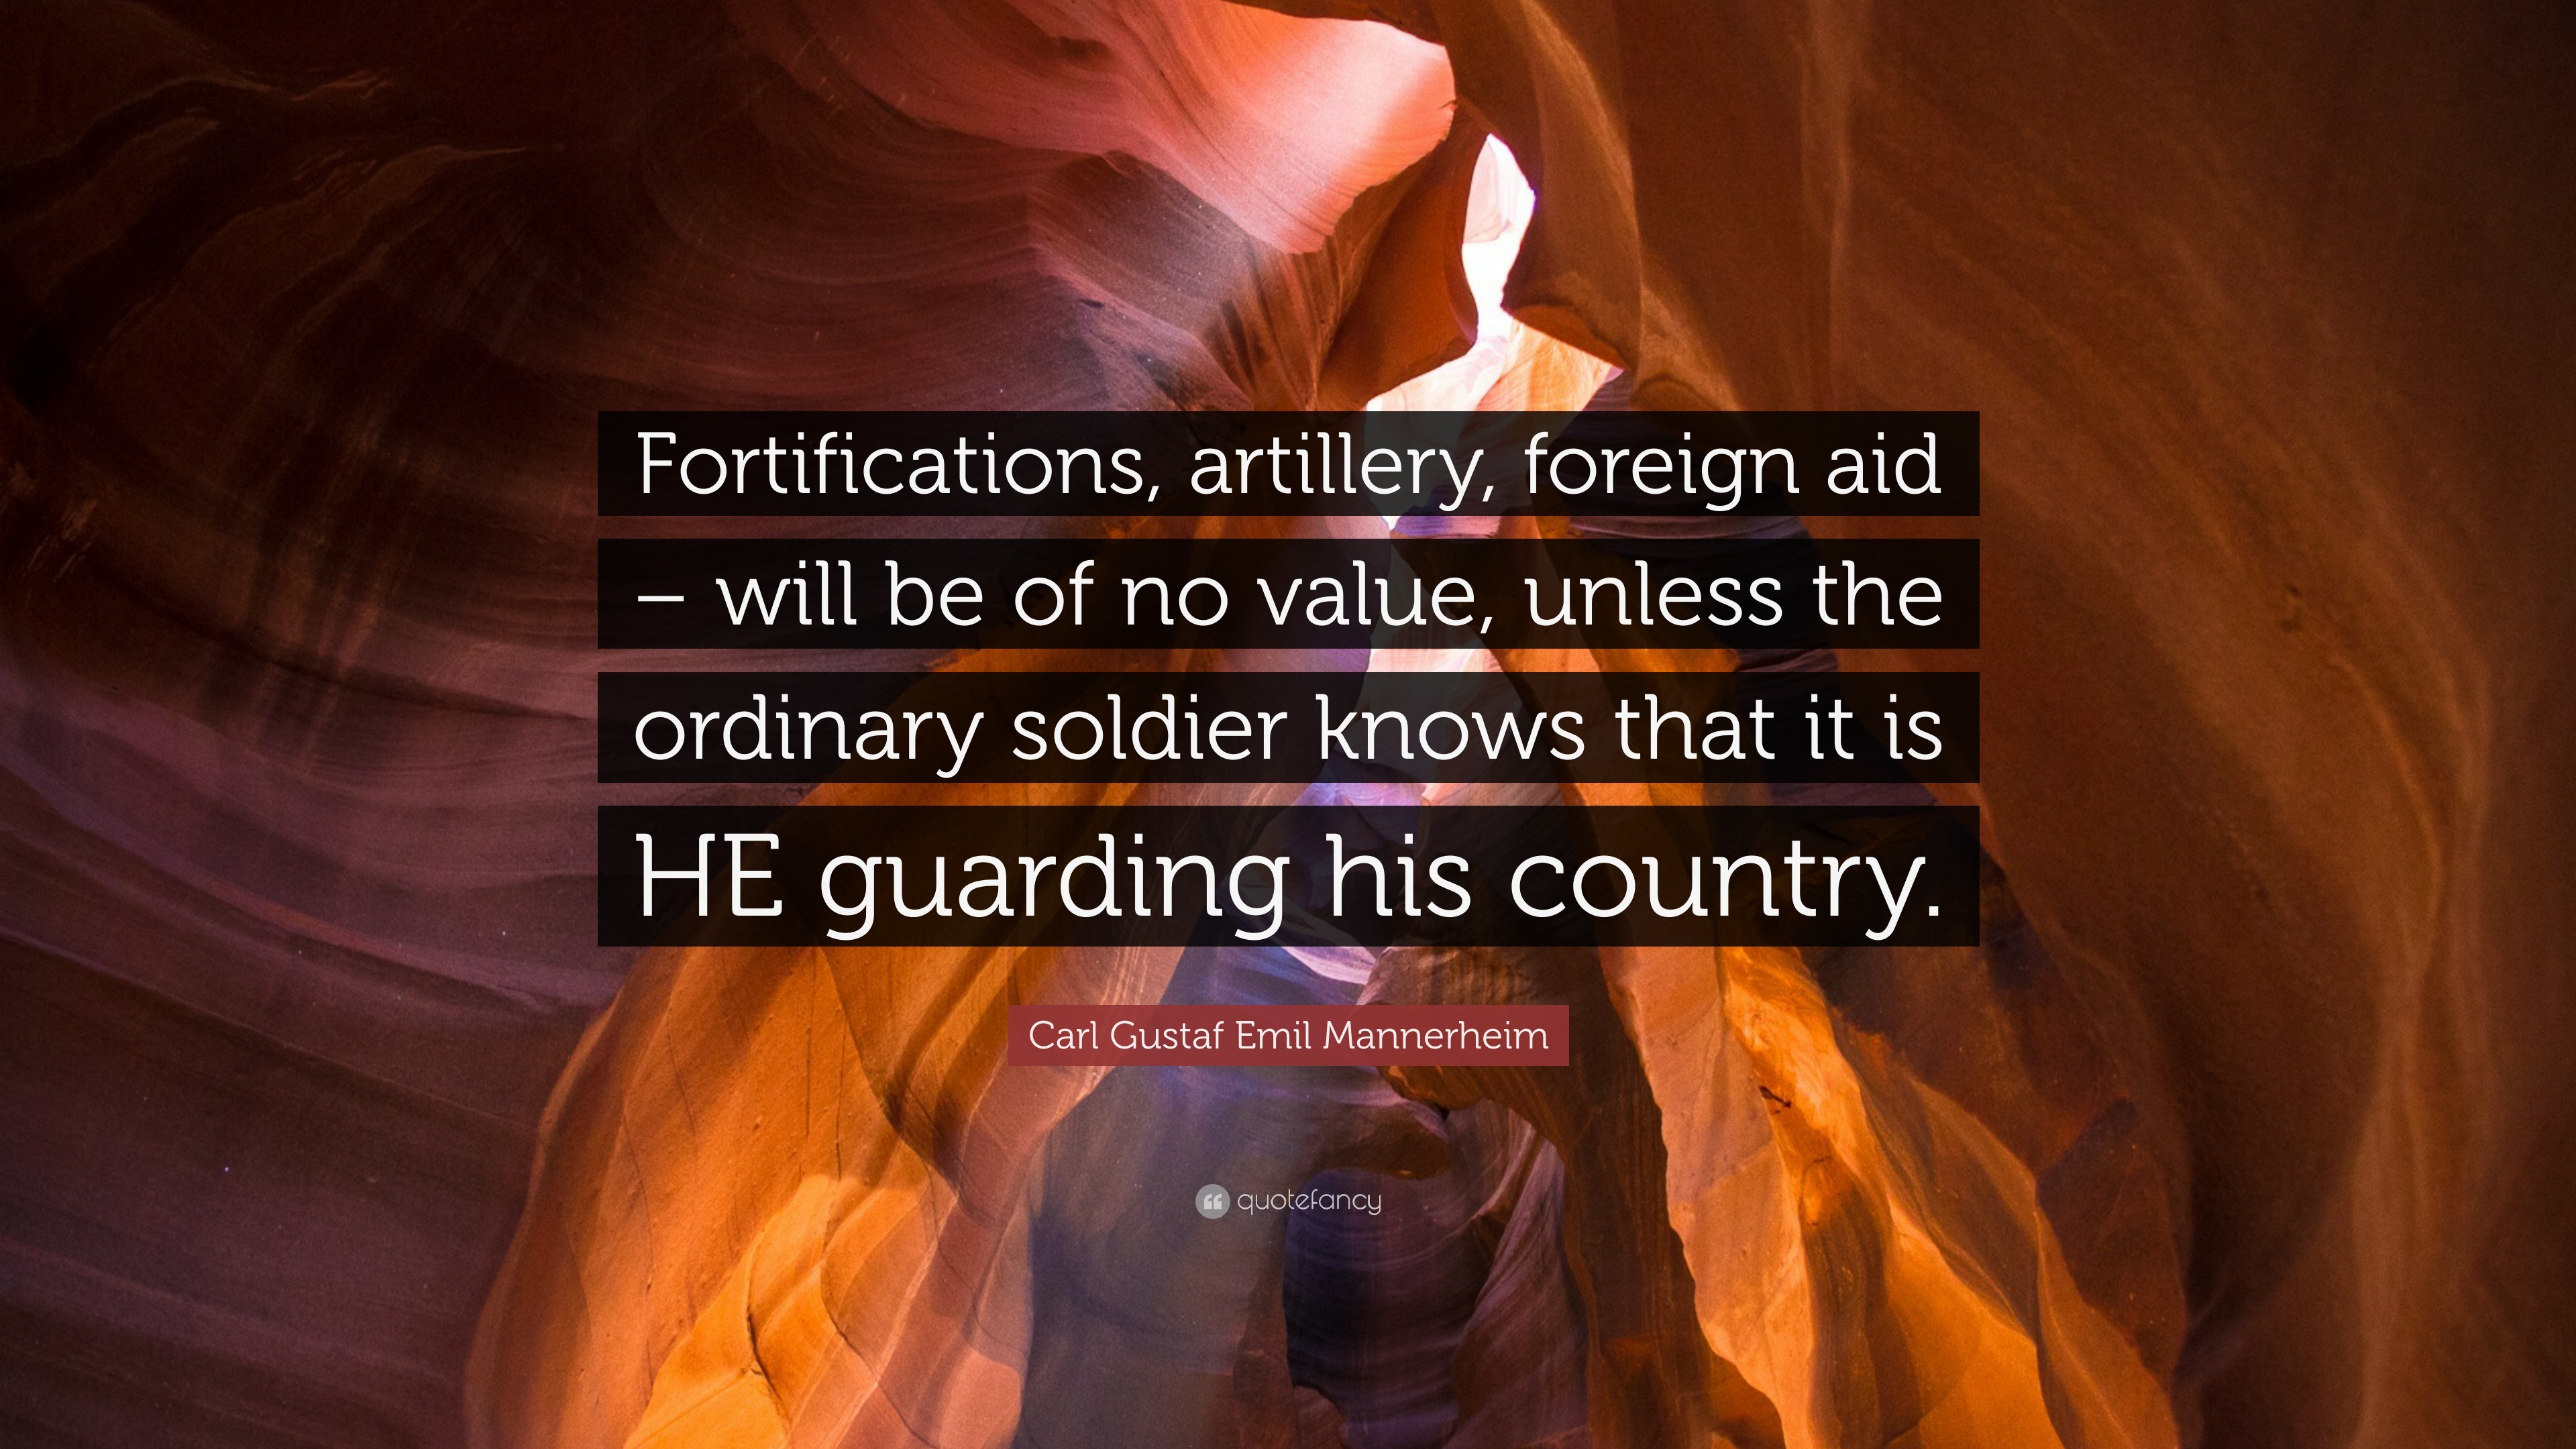 Carl Gustaf Emil Mannerheim Quote: “Fortifications, Artillery, Foreign Aid – Will Be Of No Value, Unless The Ordinary Soldier Knows That It Is He Guarding H...”